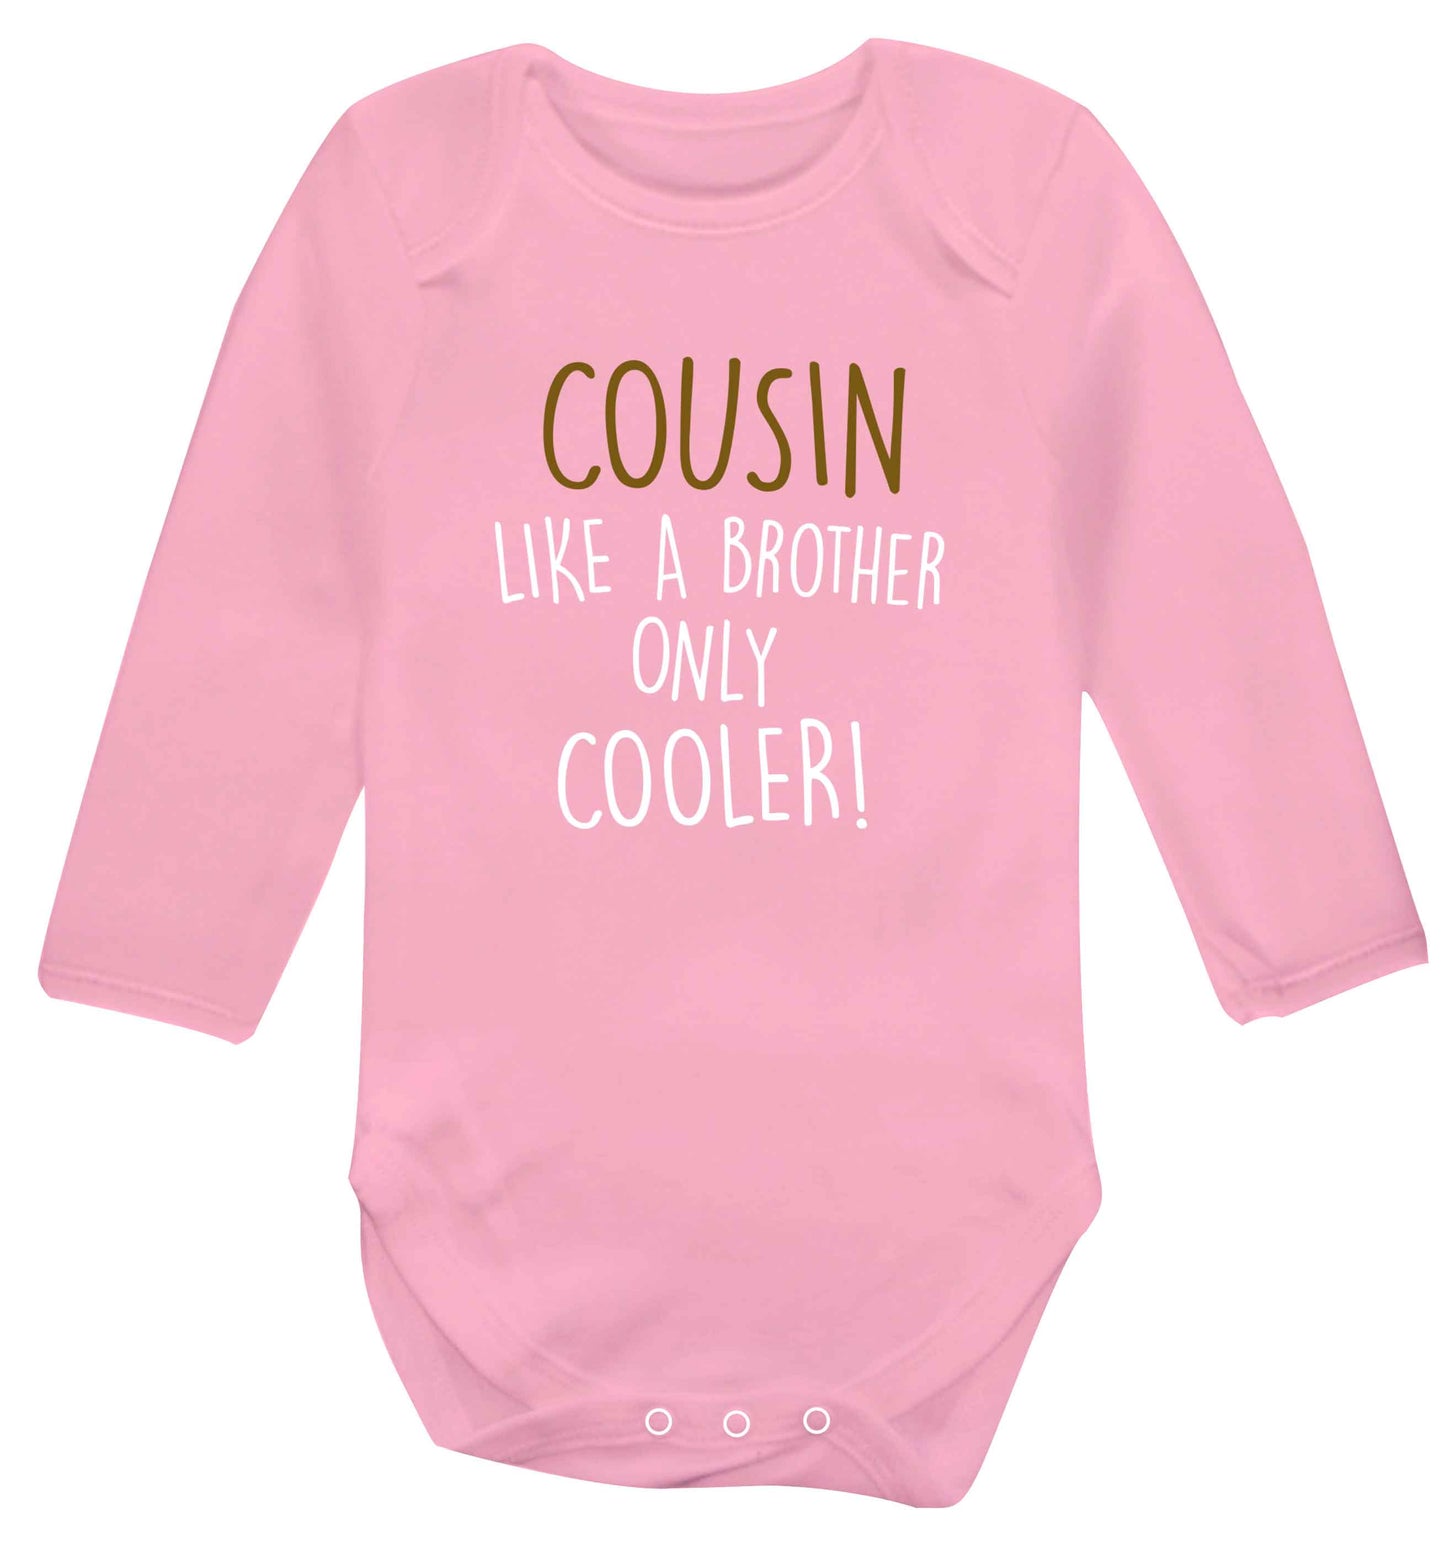 Cousin like a brother only cooler baby vest long sleeved pale pink 6-12 months